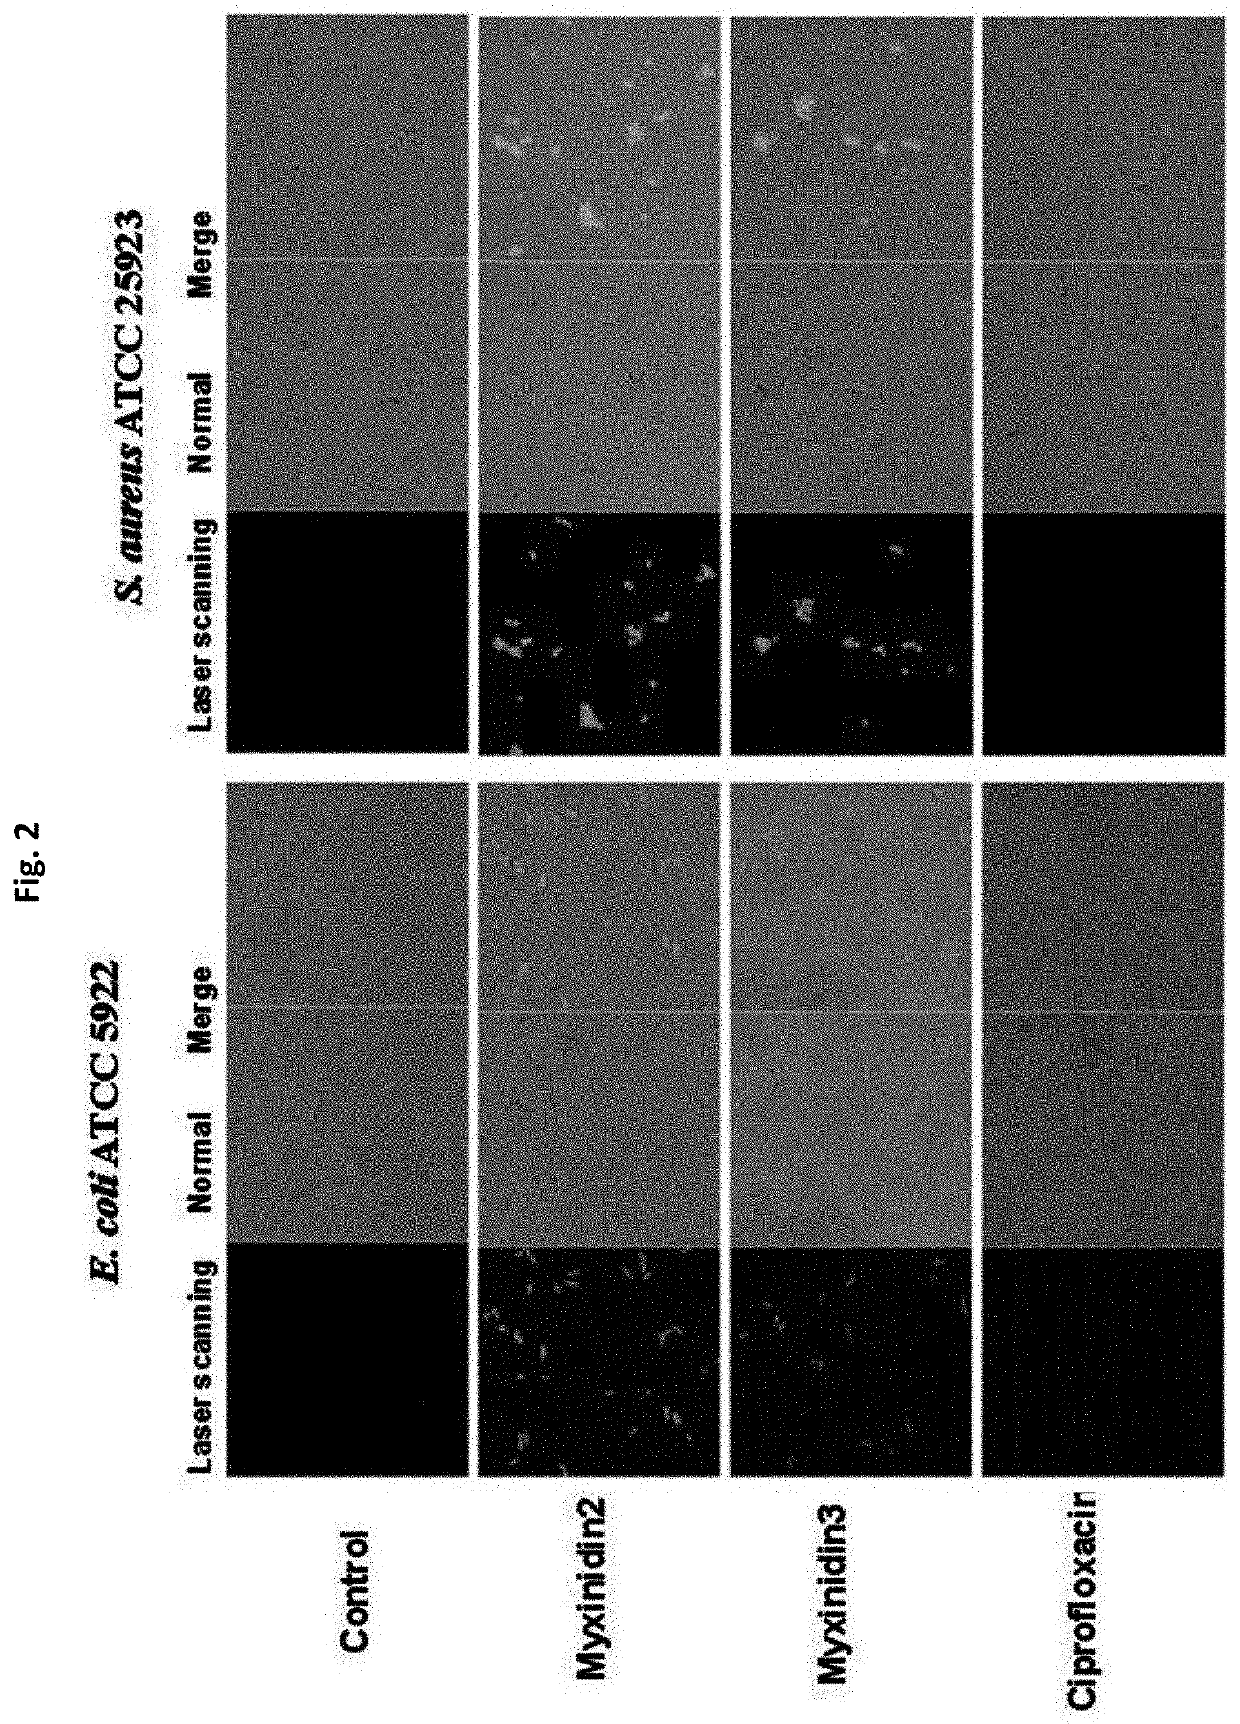 Novel antimicrobial peptide derived from myxinidin peptide and uses thereof